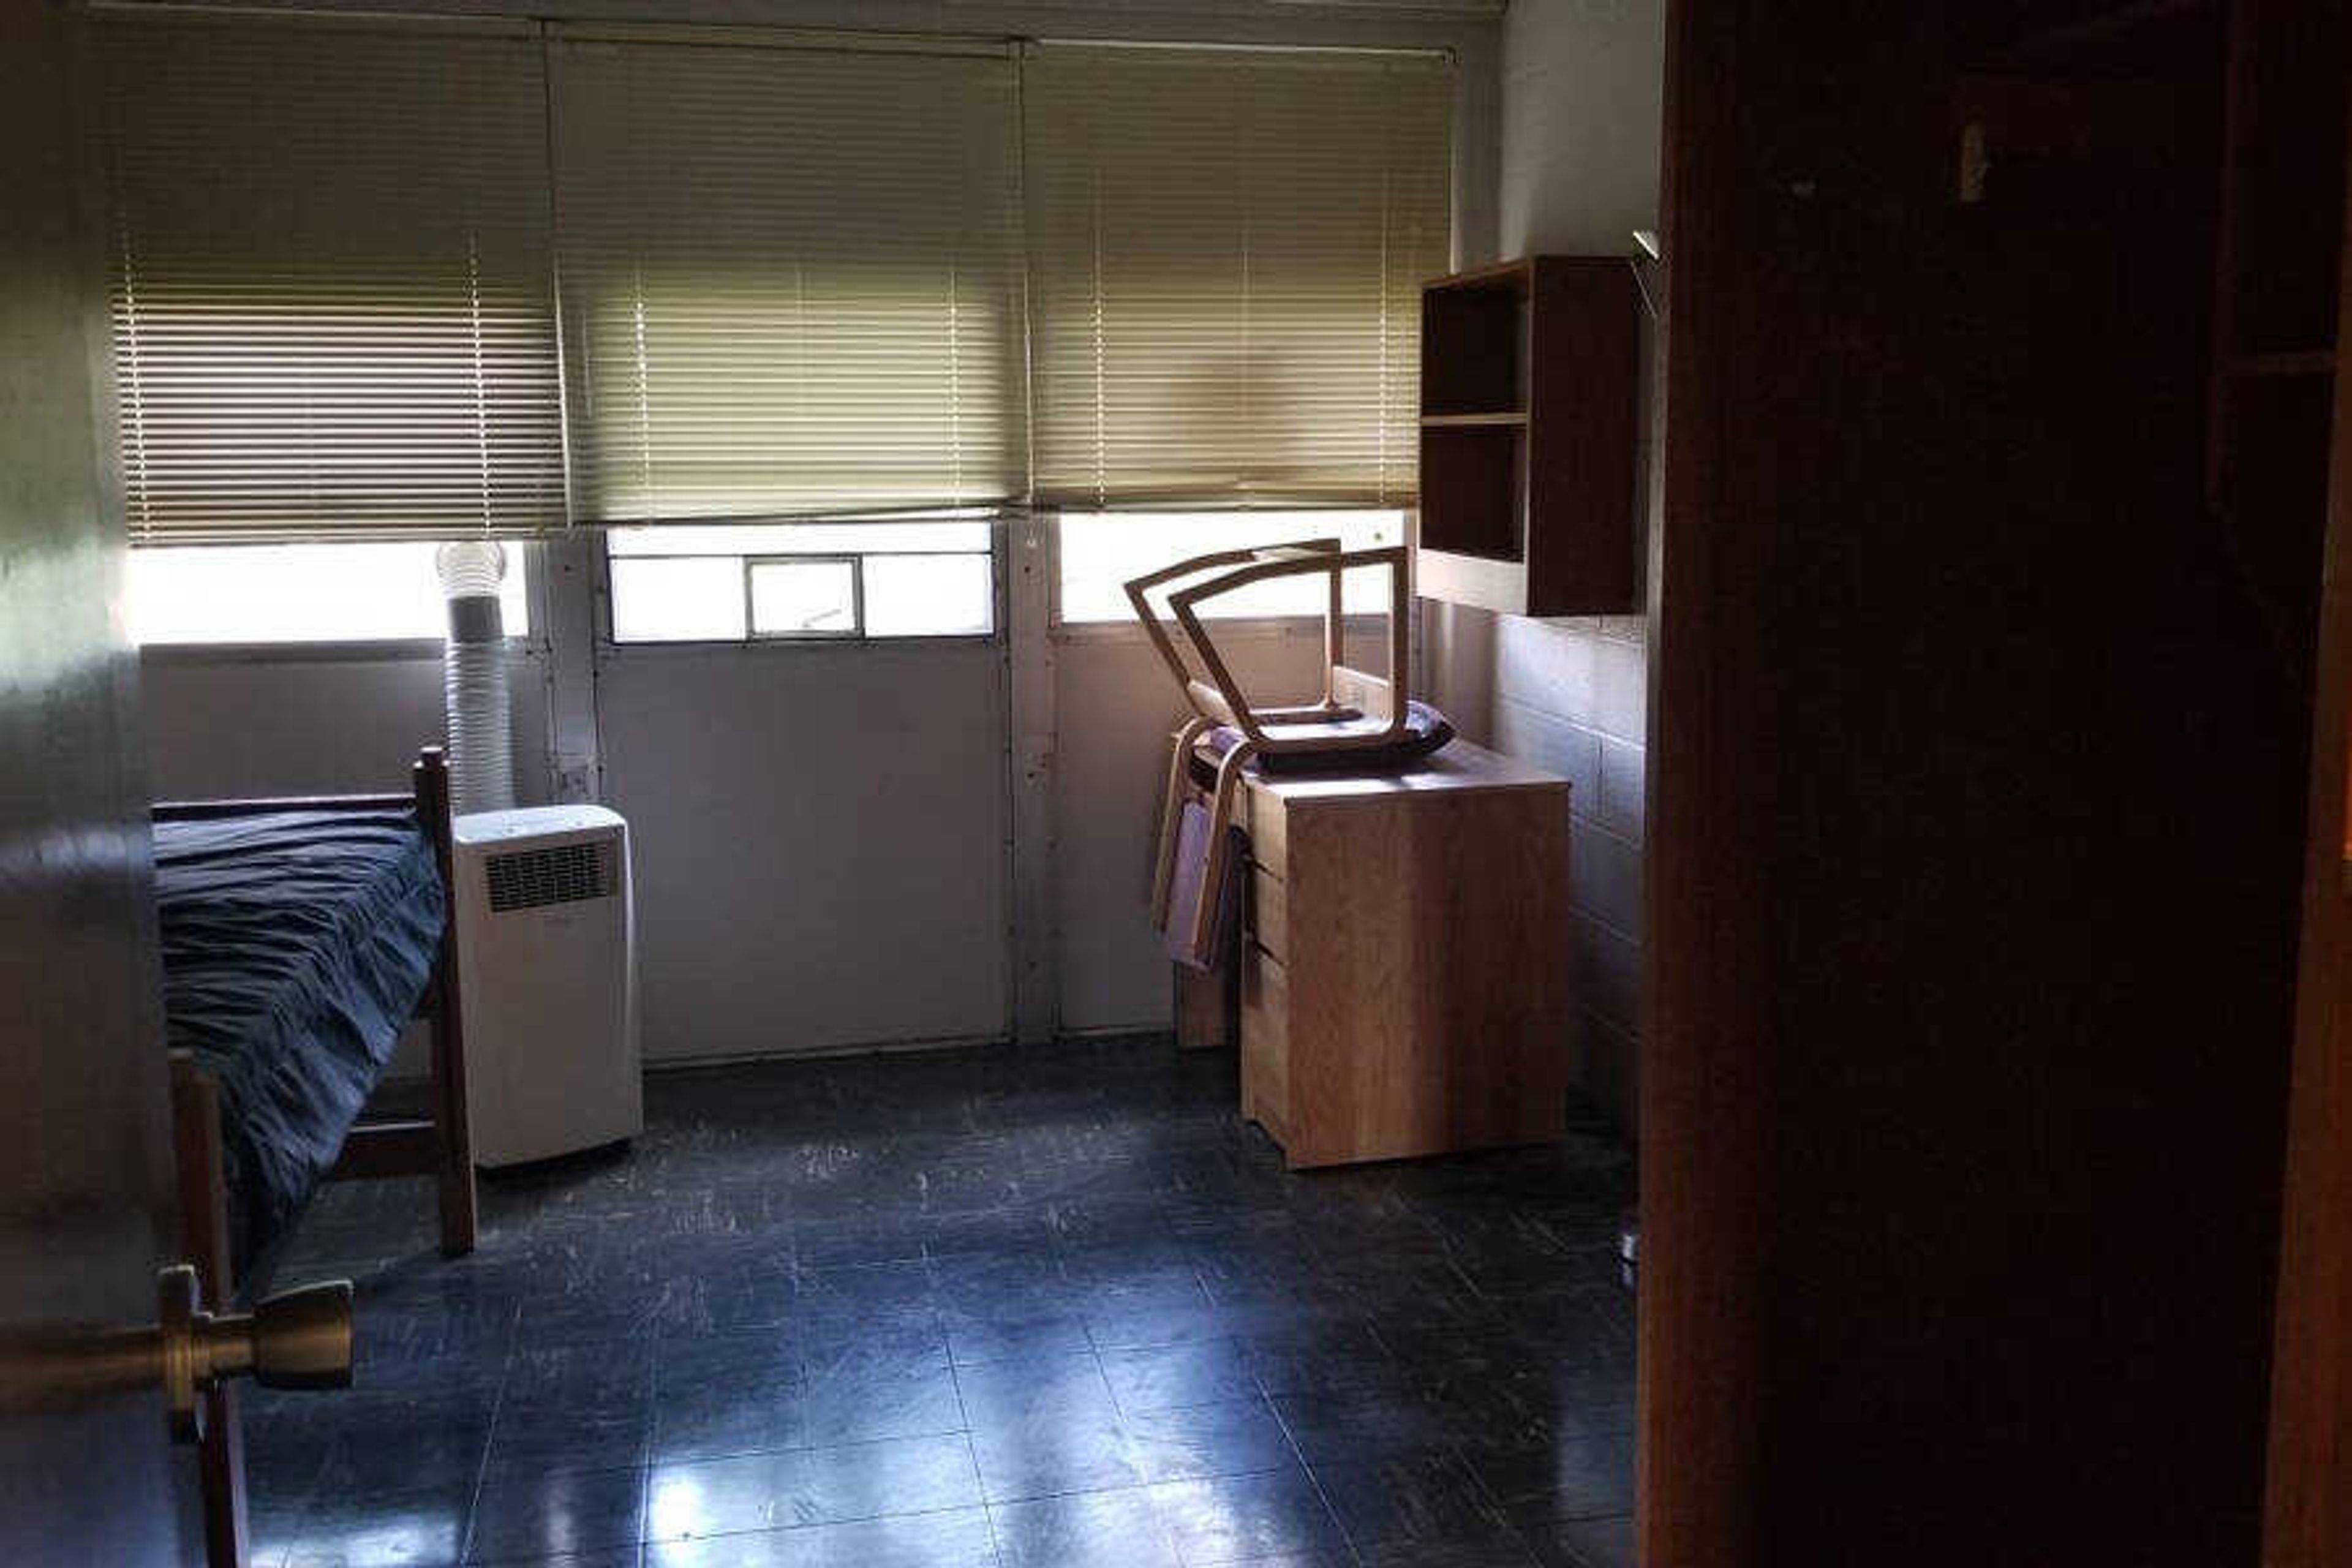 Rooms in Dearmont will be set up to house one student, and the floors will have community restrooms and showers.